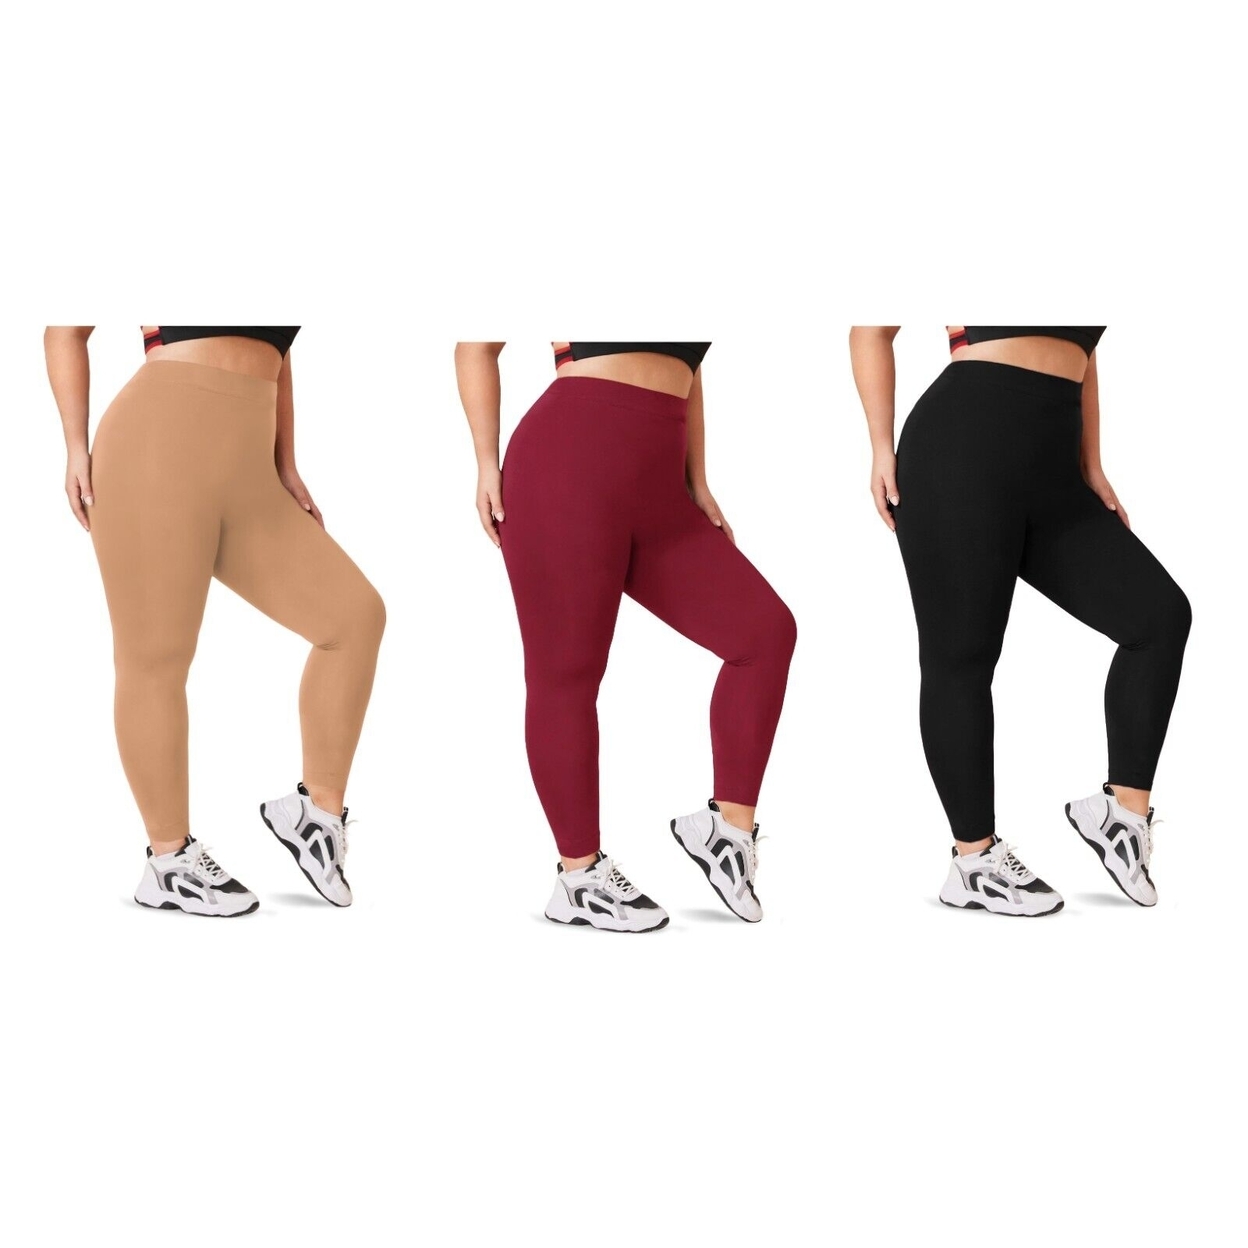 Multi-Pack: Women's Casual Ultra-Soft Smooth High Waisted Athletic Active Yoga Leggings Plus Size Available - 1-pack, 3x